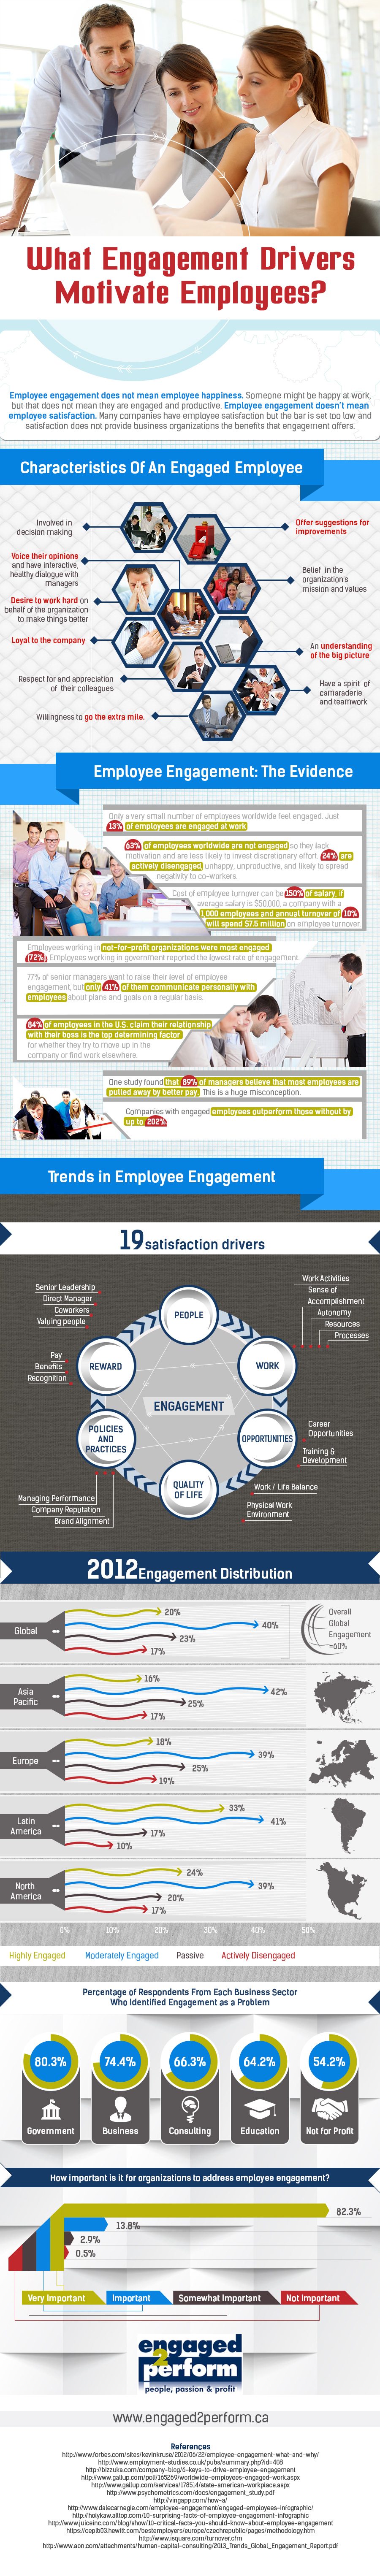 Engagement-Drivers-That- Motivates-Employees